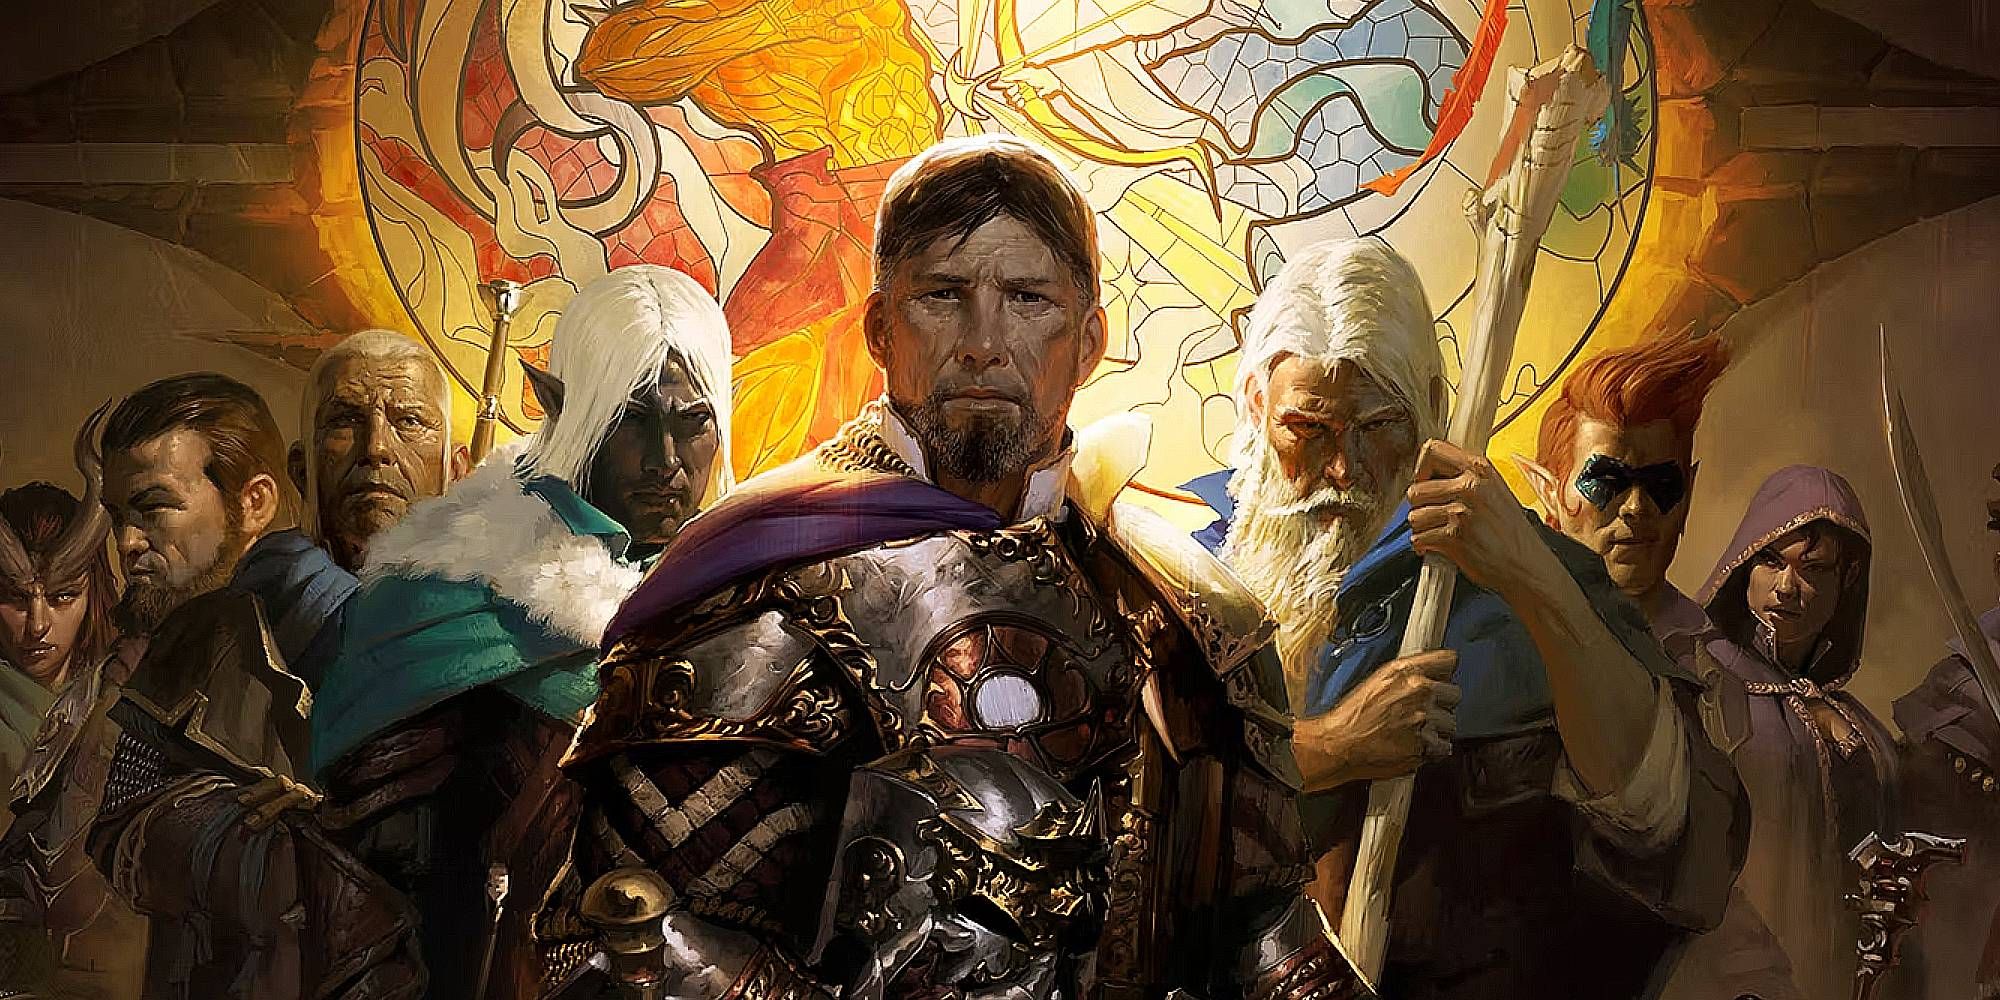 A group of adventurers stand and face the camera with a stained glass mural behind them